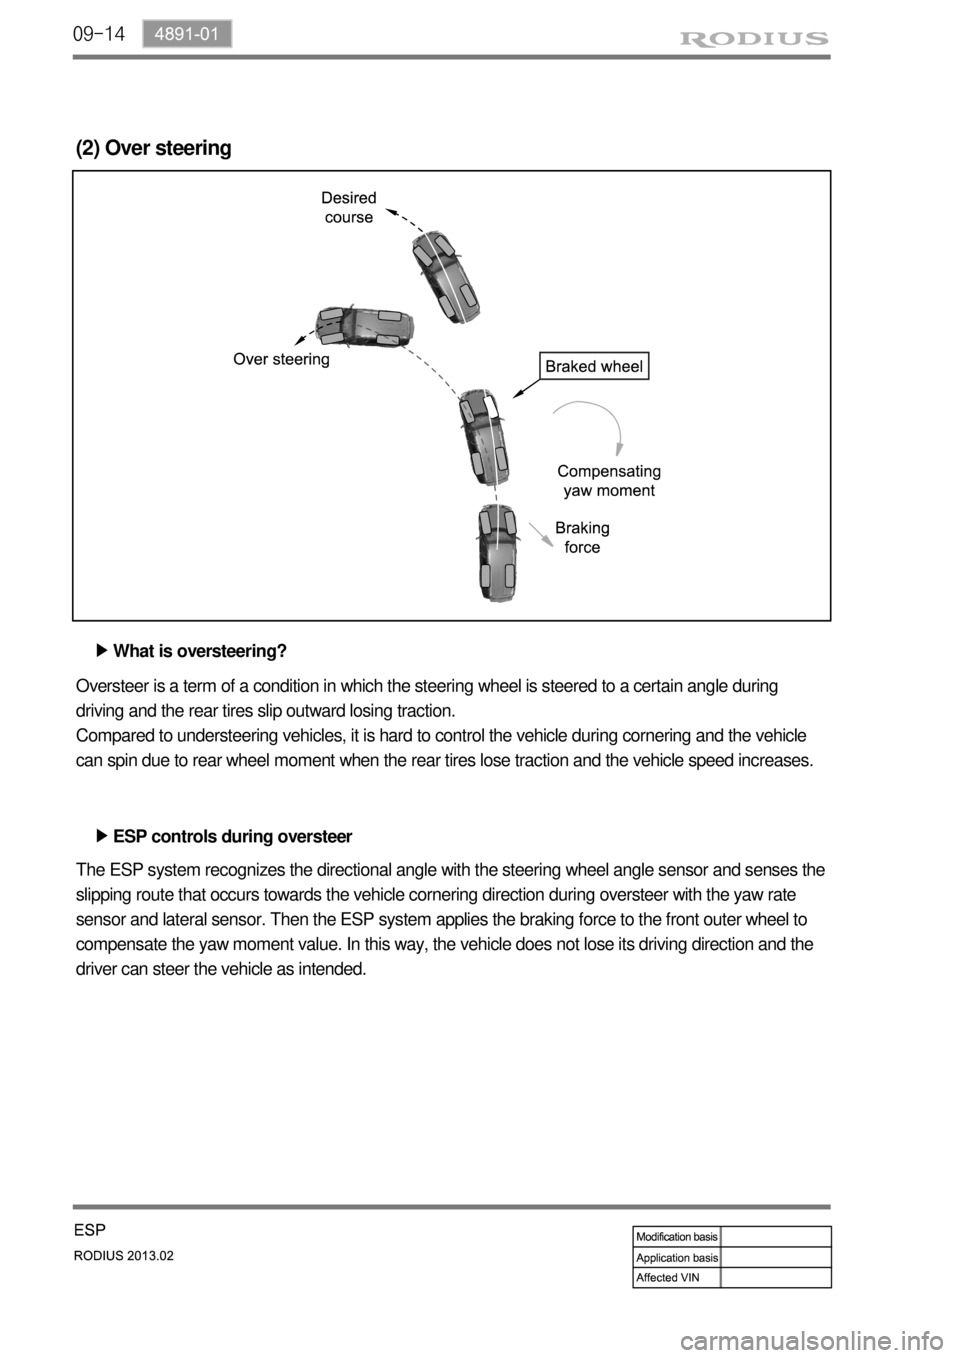 SSANGYONG TURISMO 2013  Service Manual 09-14
(2) Over steering
What is oversteering? ▶
ESP controls during oversteer ▶ Oversteer is a term of a condition in which the steering wheel is steered to a certain angle during 
driving and the